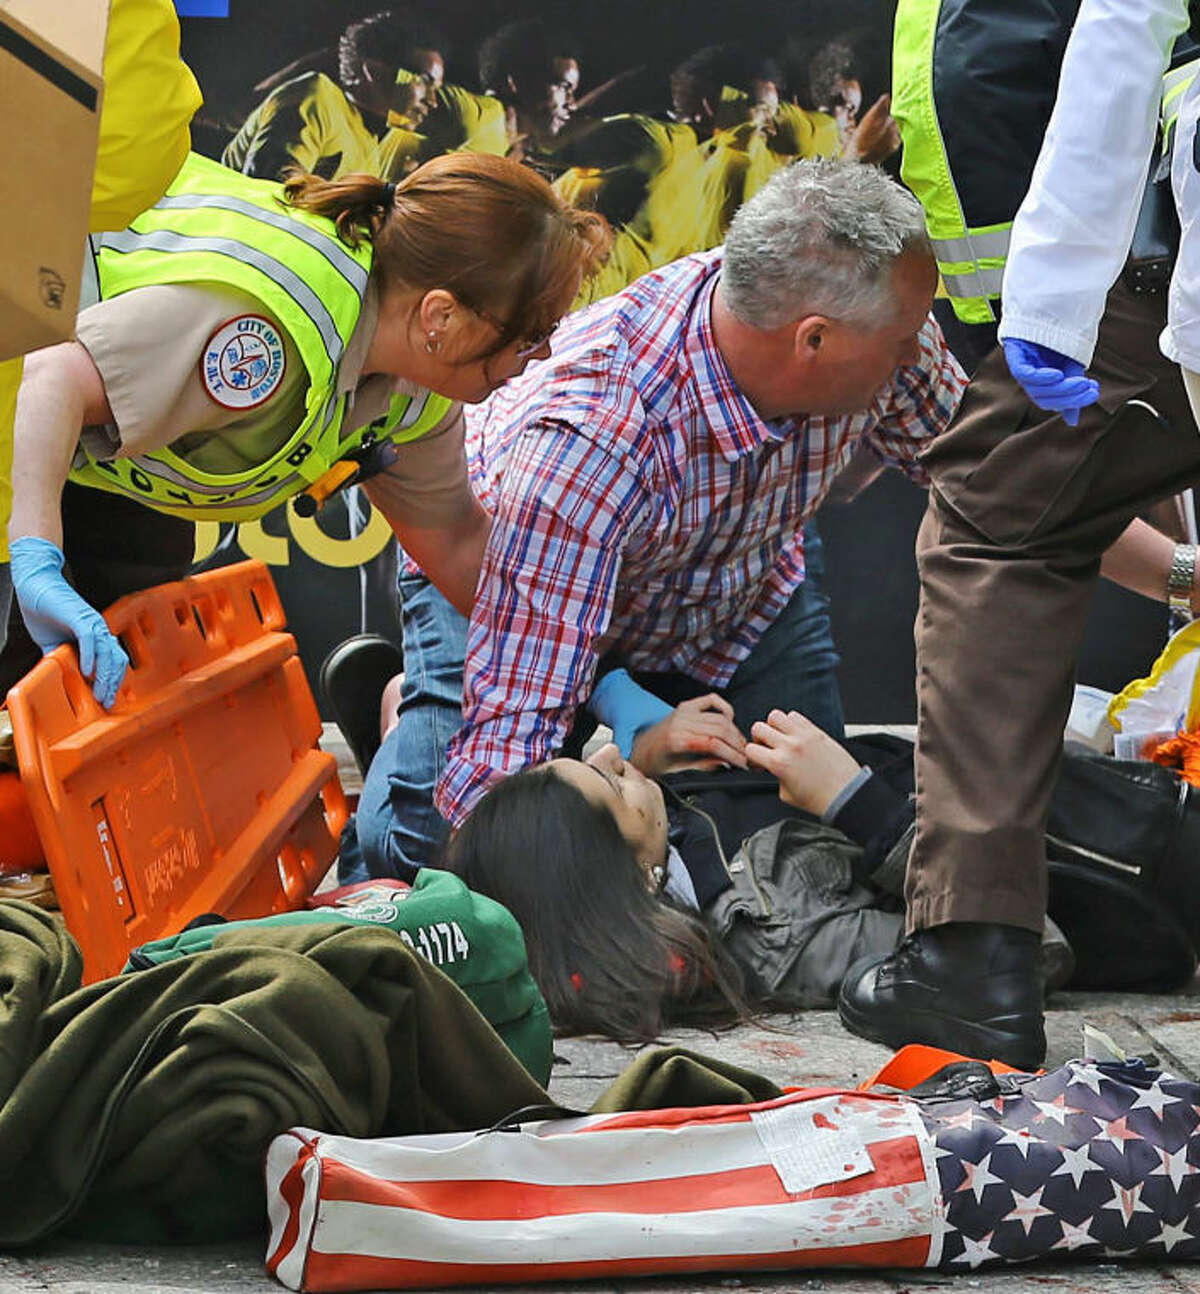 Medical workers aid injured people at the 2013 Boston Marathon following an explosion in Boston, Monday, April 15, 2013. Two explosions shattered the euphoria of the Boston Marathon finish line on Monday, sending authorities out on the course to carry off the injured while the stragglers were rerouted away from the smoking site of the blasts. (AP Photo/The Boston Globe, David L Ryan)